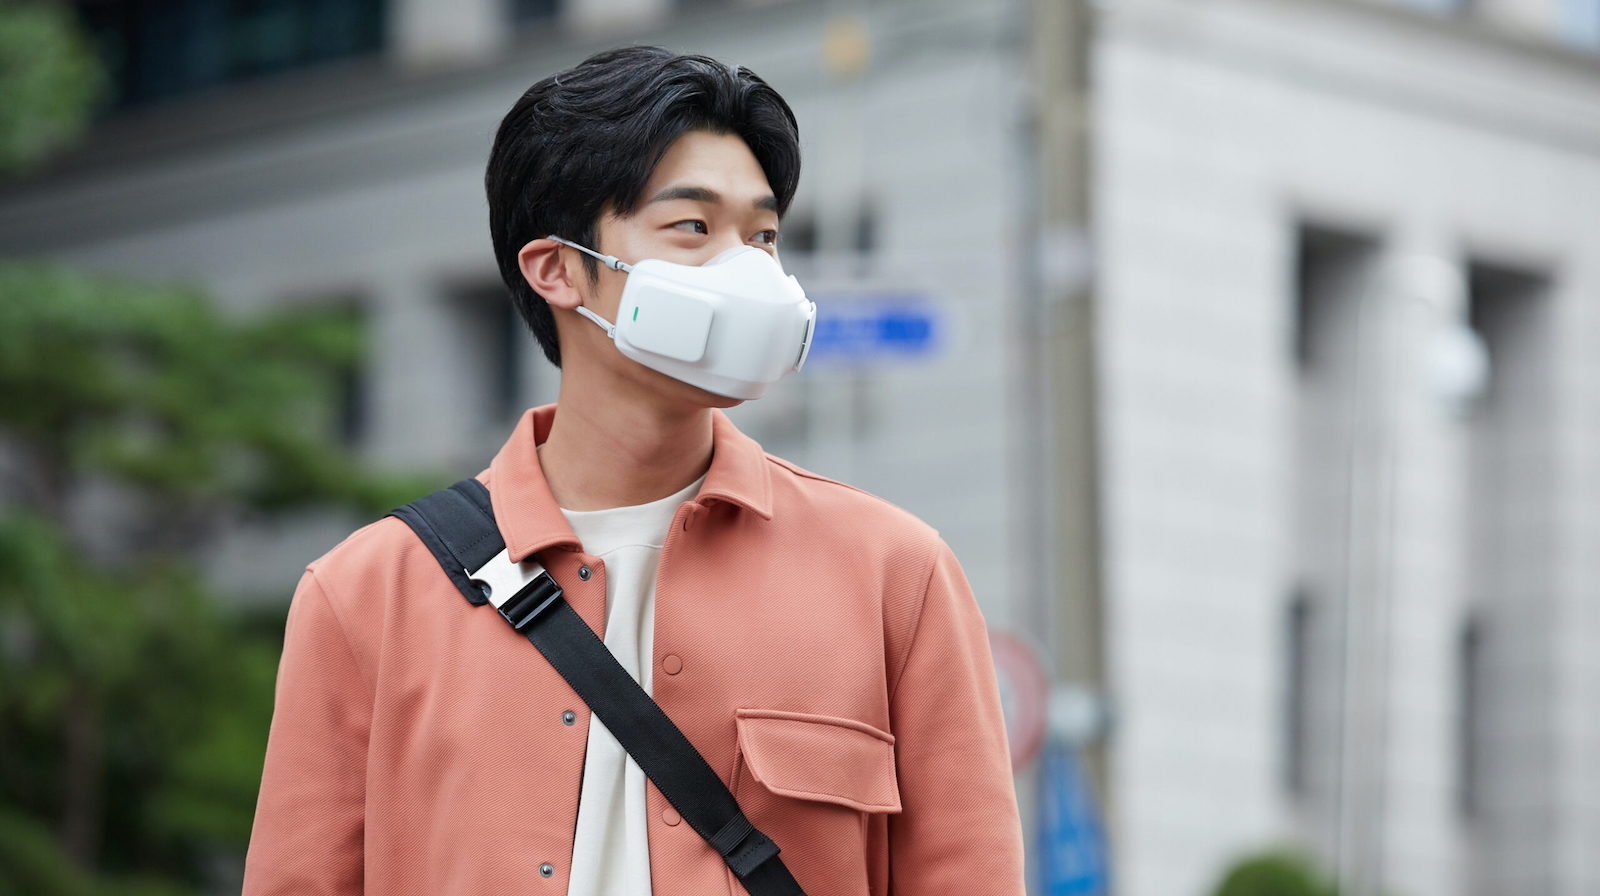 LG PuriCare Wearable Air Purifier battery-powered face mask uses 2 H13 HEPA filters